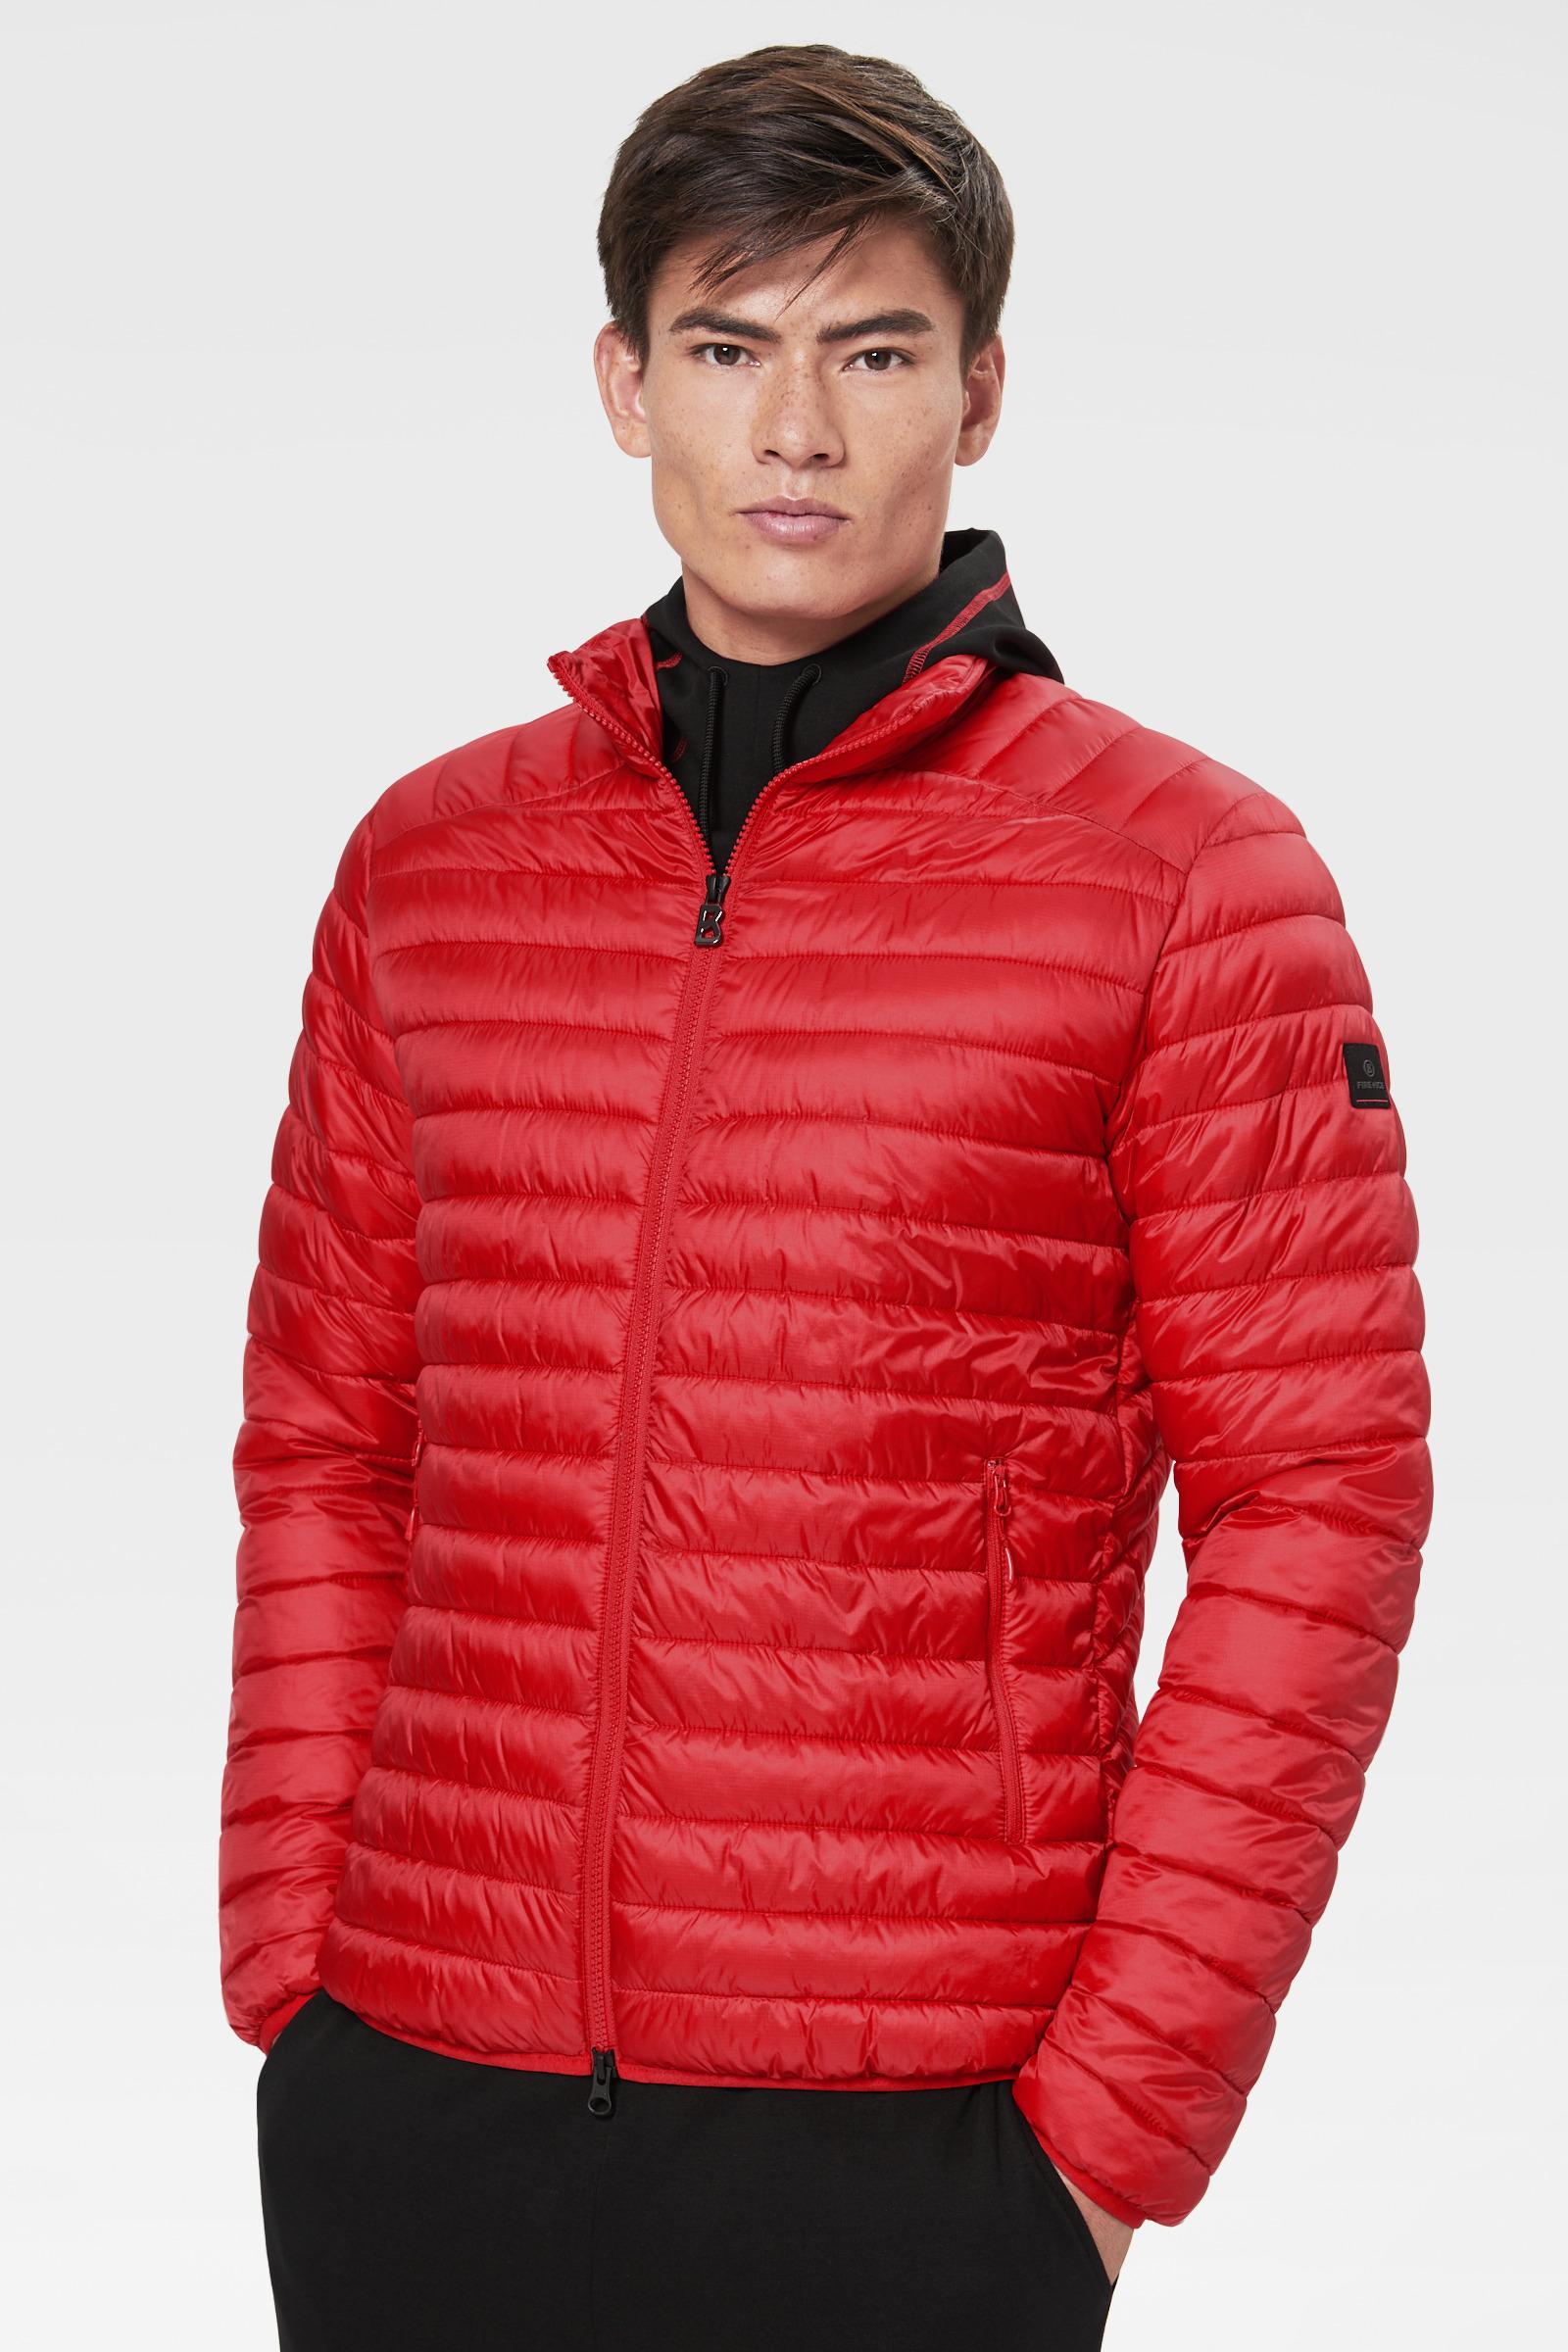 Bogner Fabiano Quilted Jacket In Red for Men - Lyst